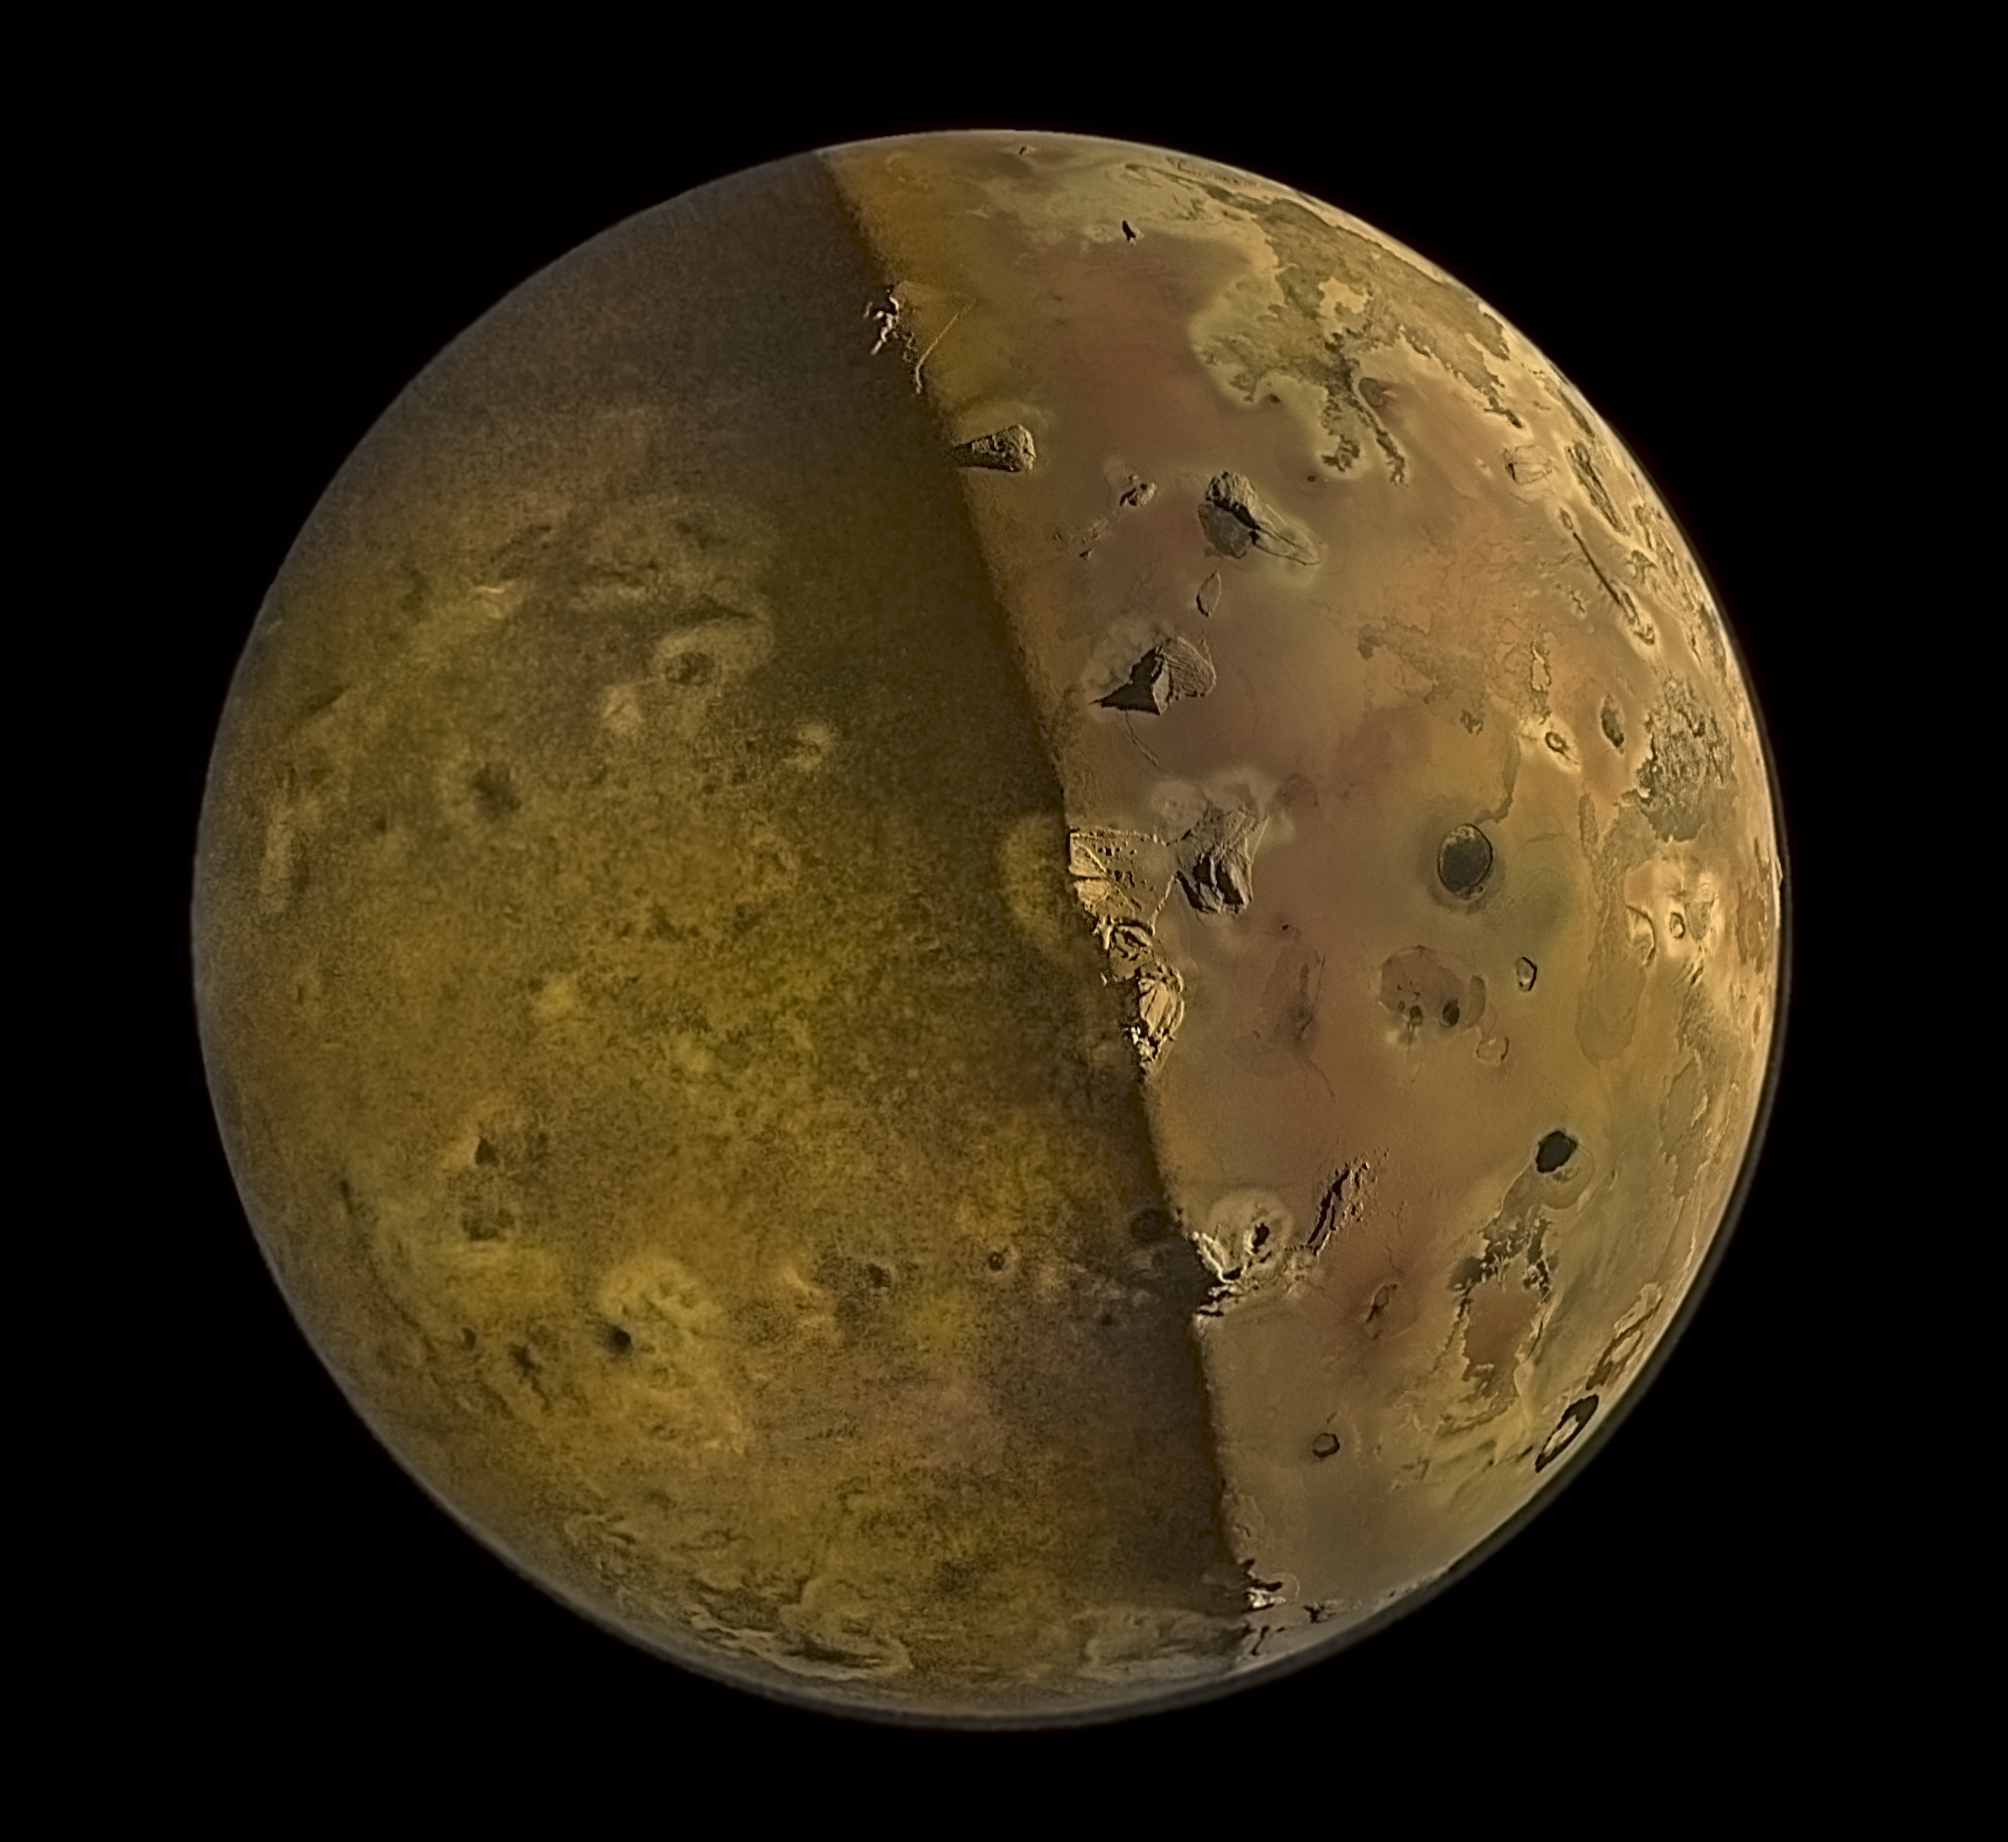 An image of an orangish-brown moon showing craters and other surface detail; the right hemisphere is lit with sunlight reflected from Jupiter.